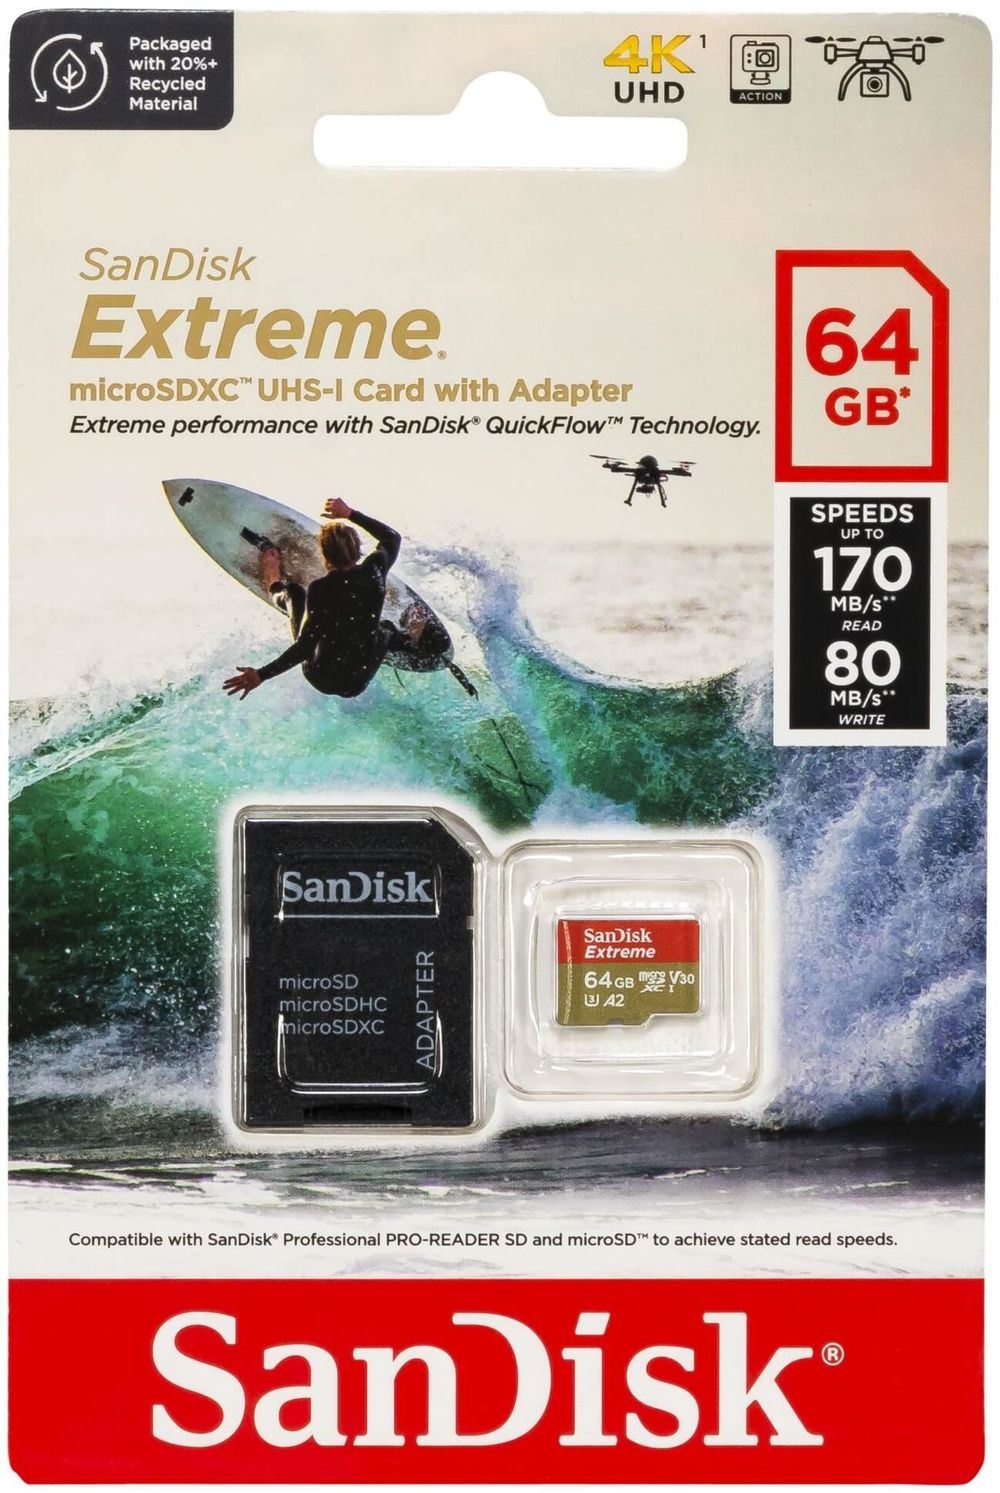 Sandisk 64GB microSDXC Class 10 U3 V30 A2 Extreme Action Cams and Drones + adapterrel